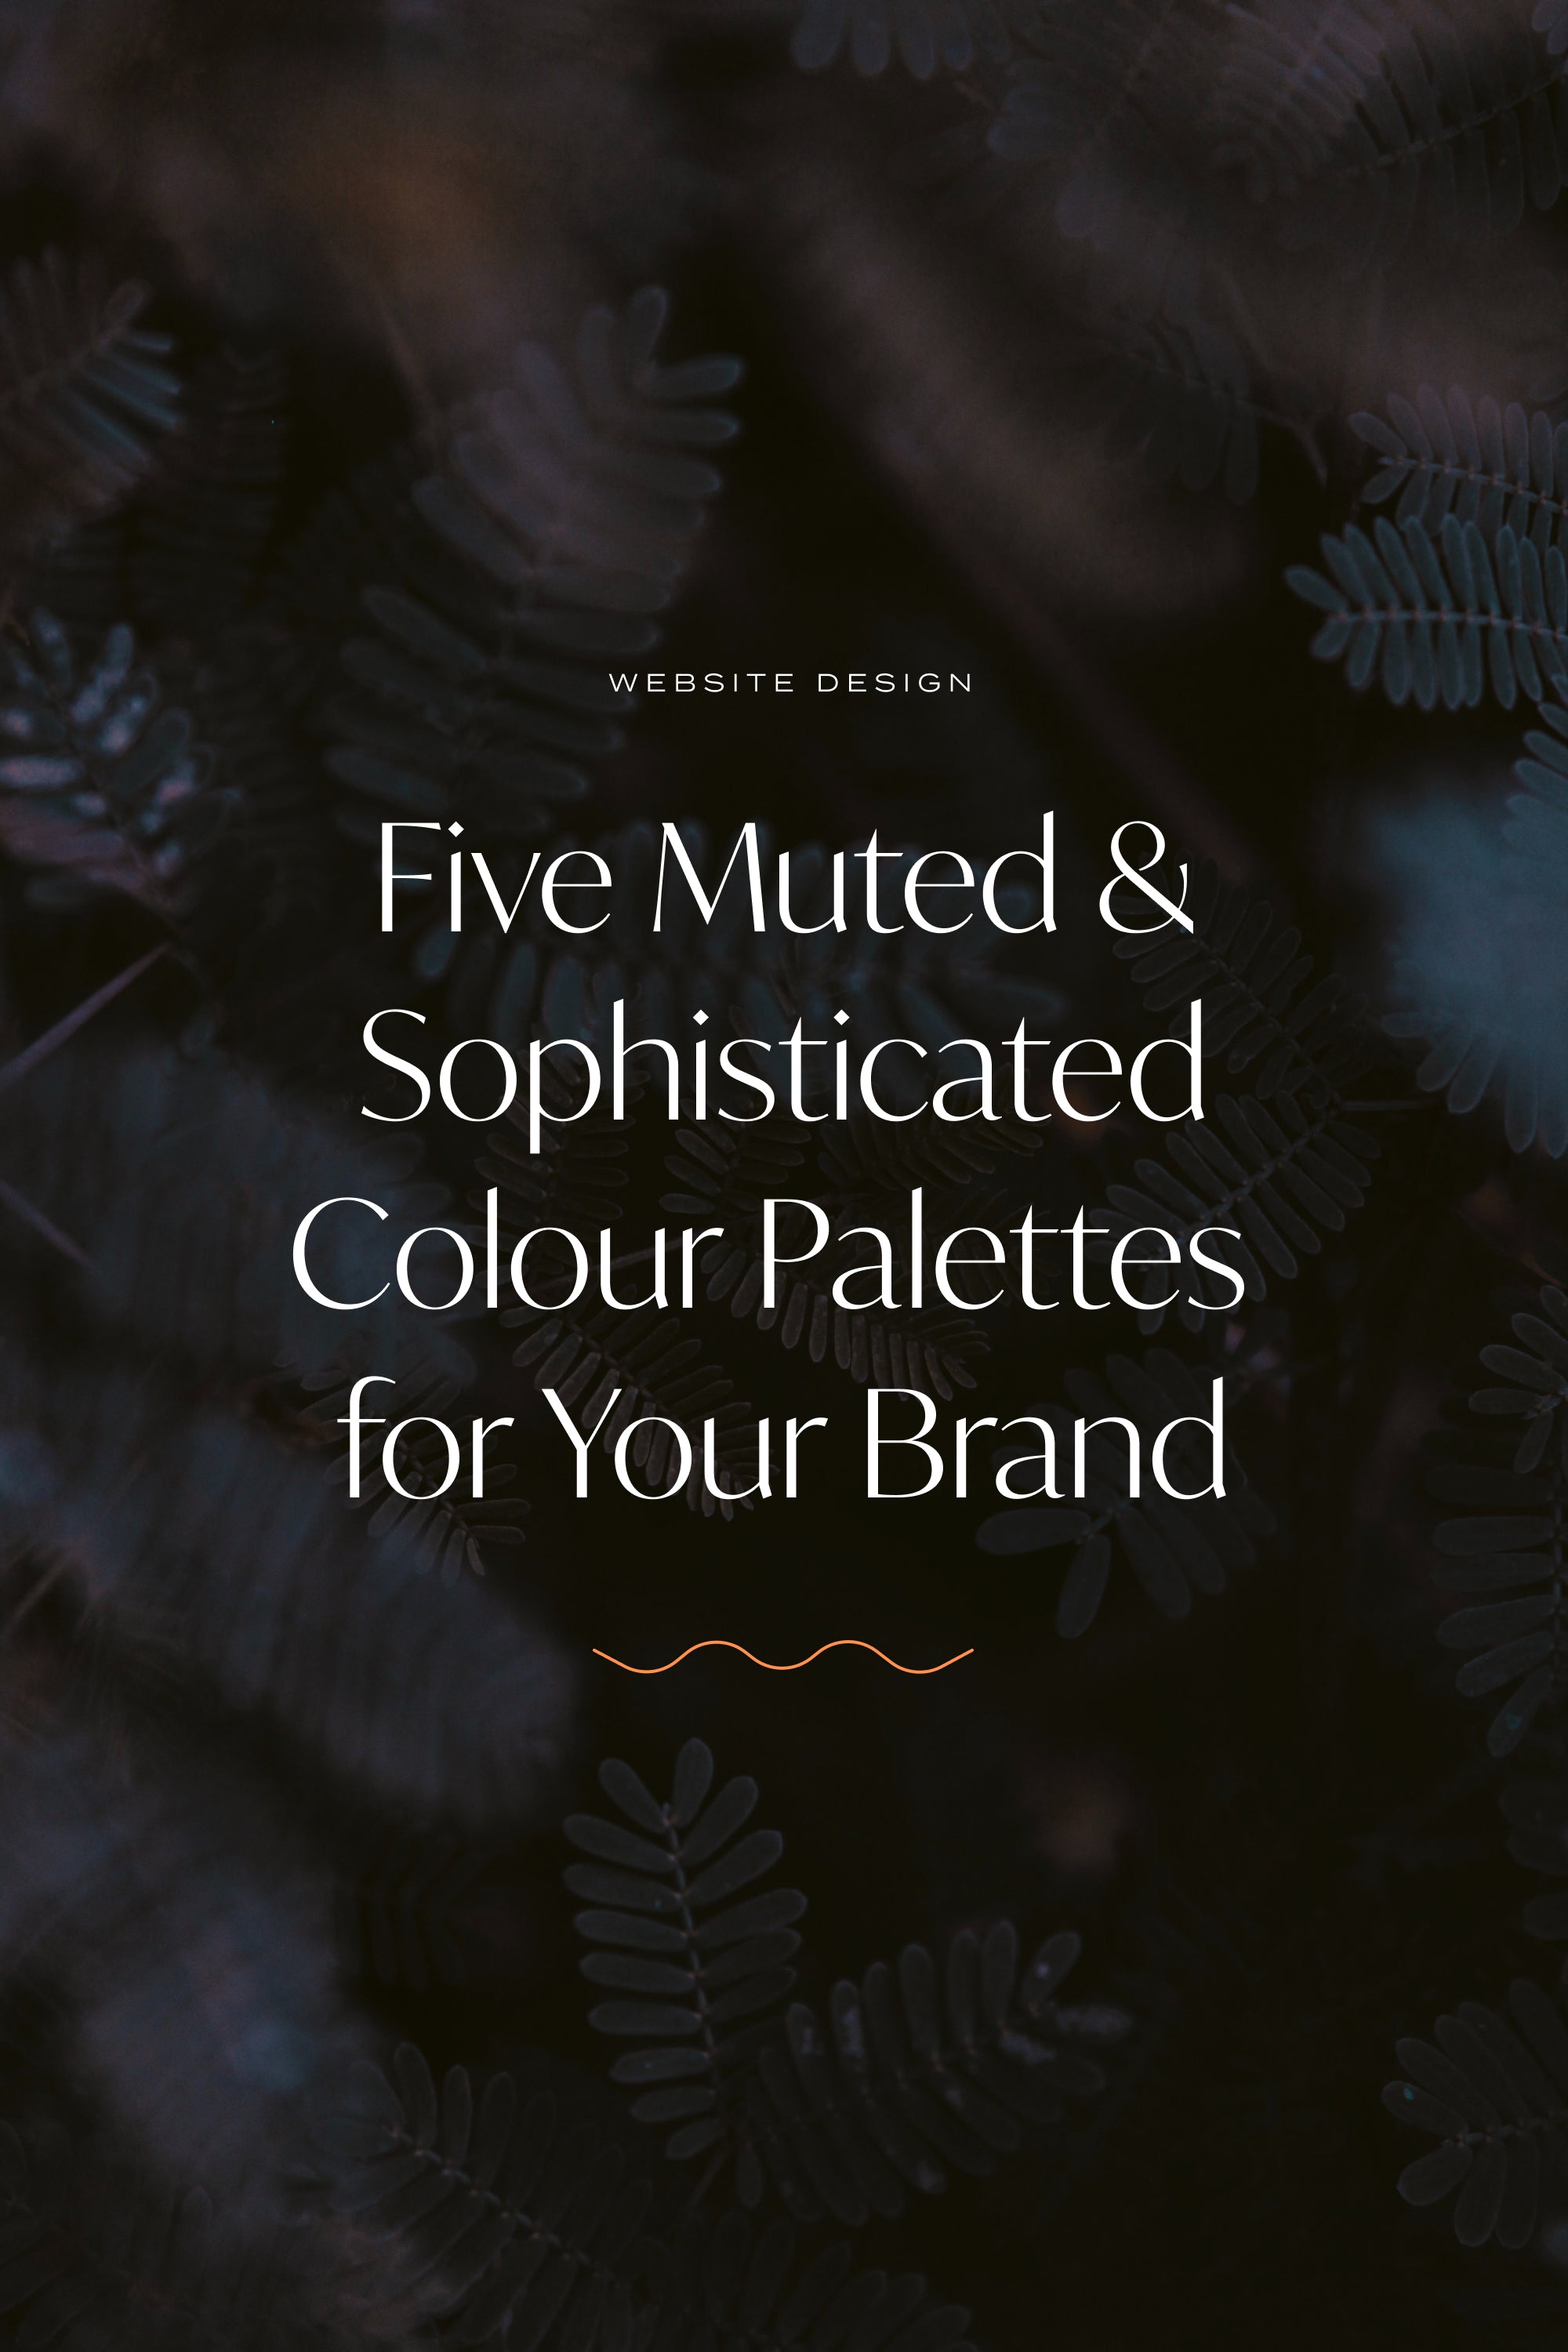 Five Muted and Sophisticated Colour Palettes for Your Brand